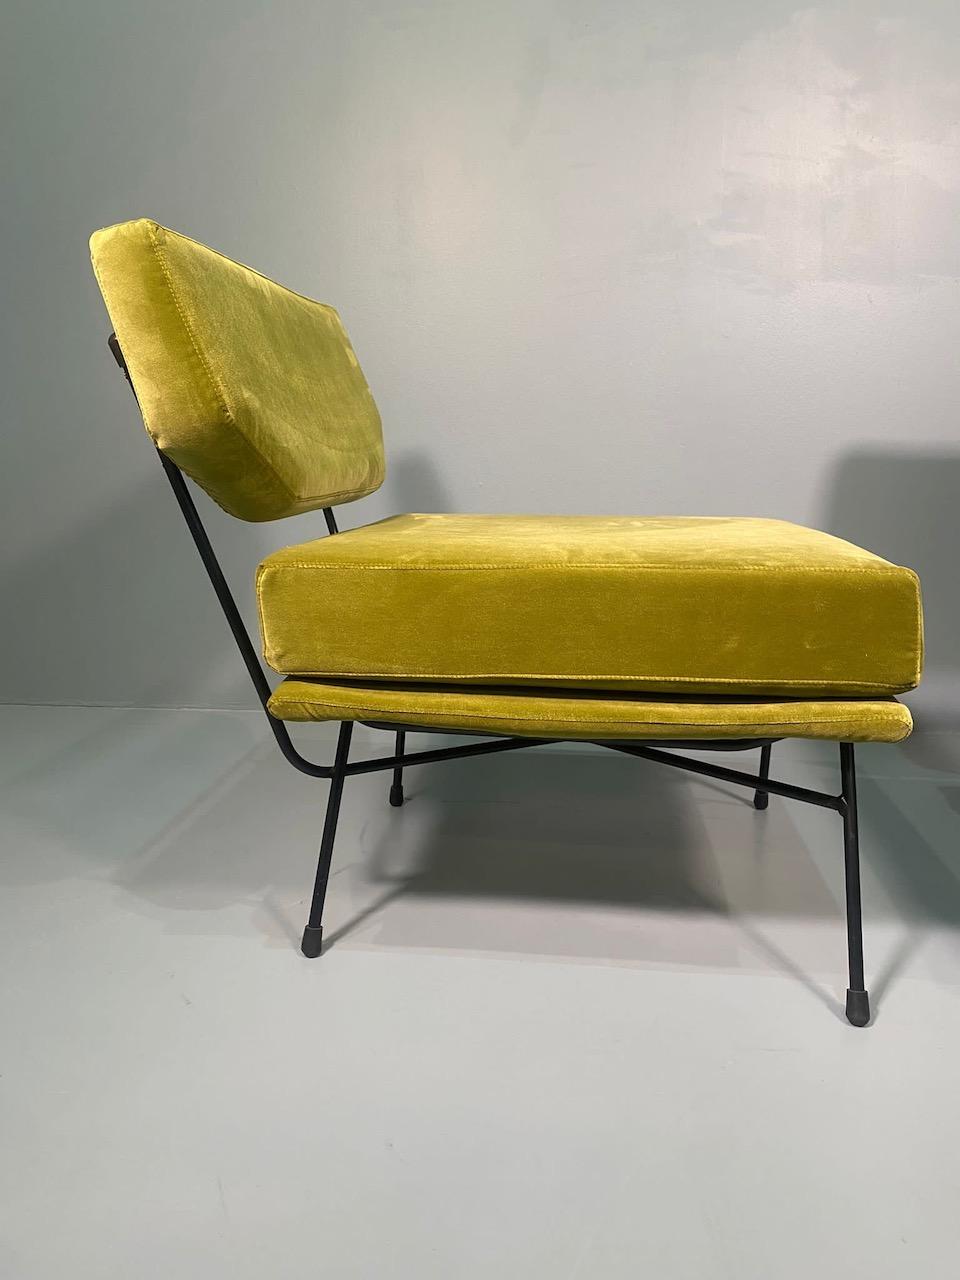 Pair of 'Elettra' Lounge Chairs by BBPR, Arflex, Italy 1953, Compasso D'Oro 1954 For Sale 9